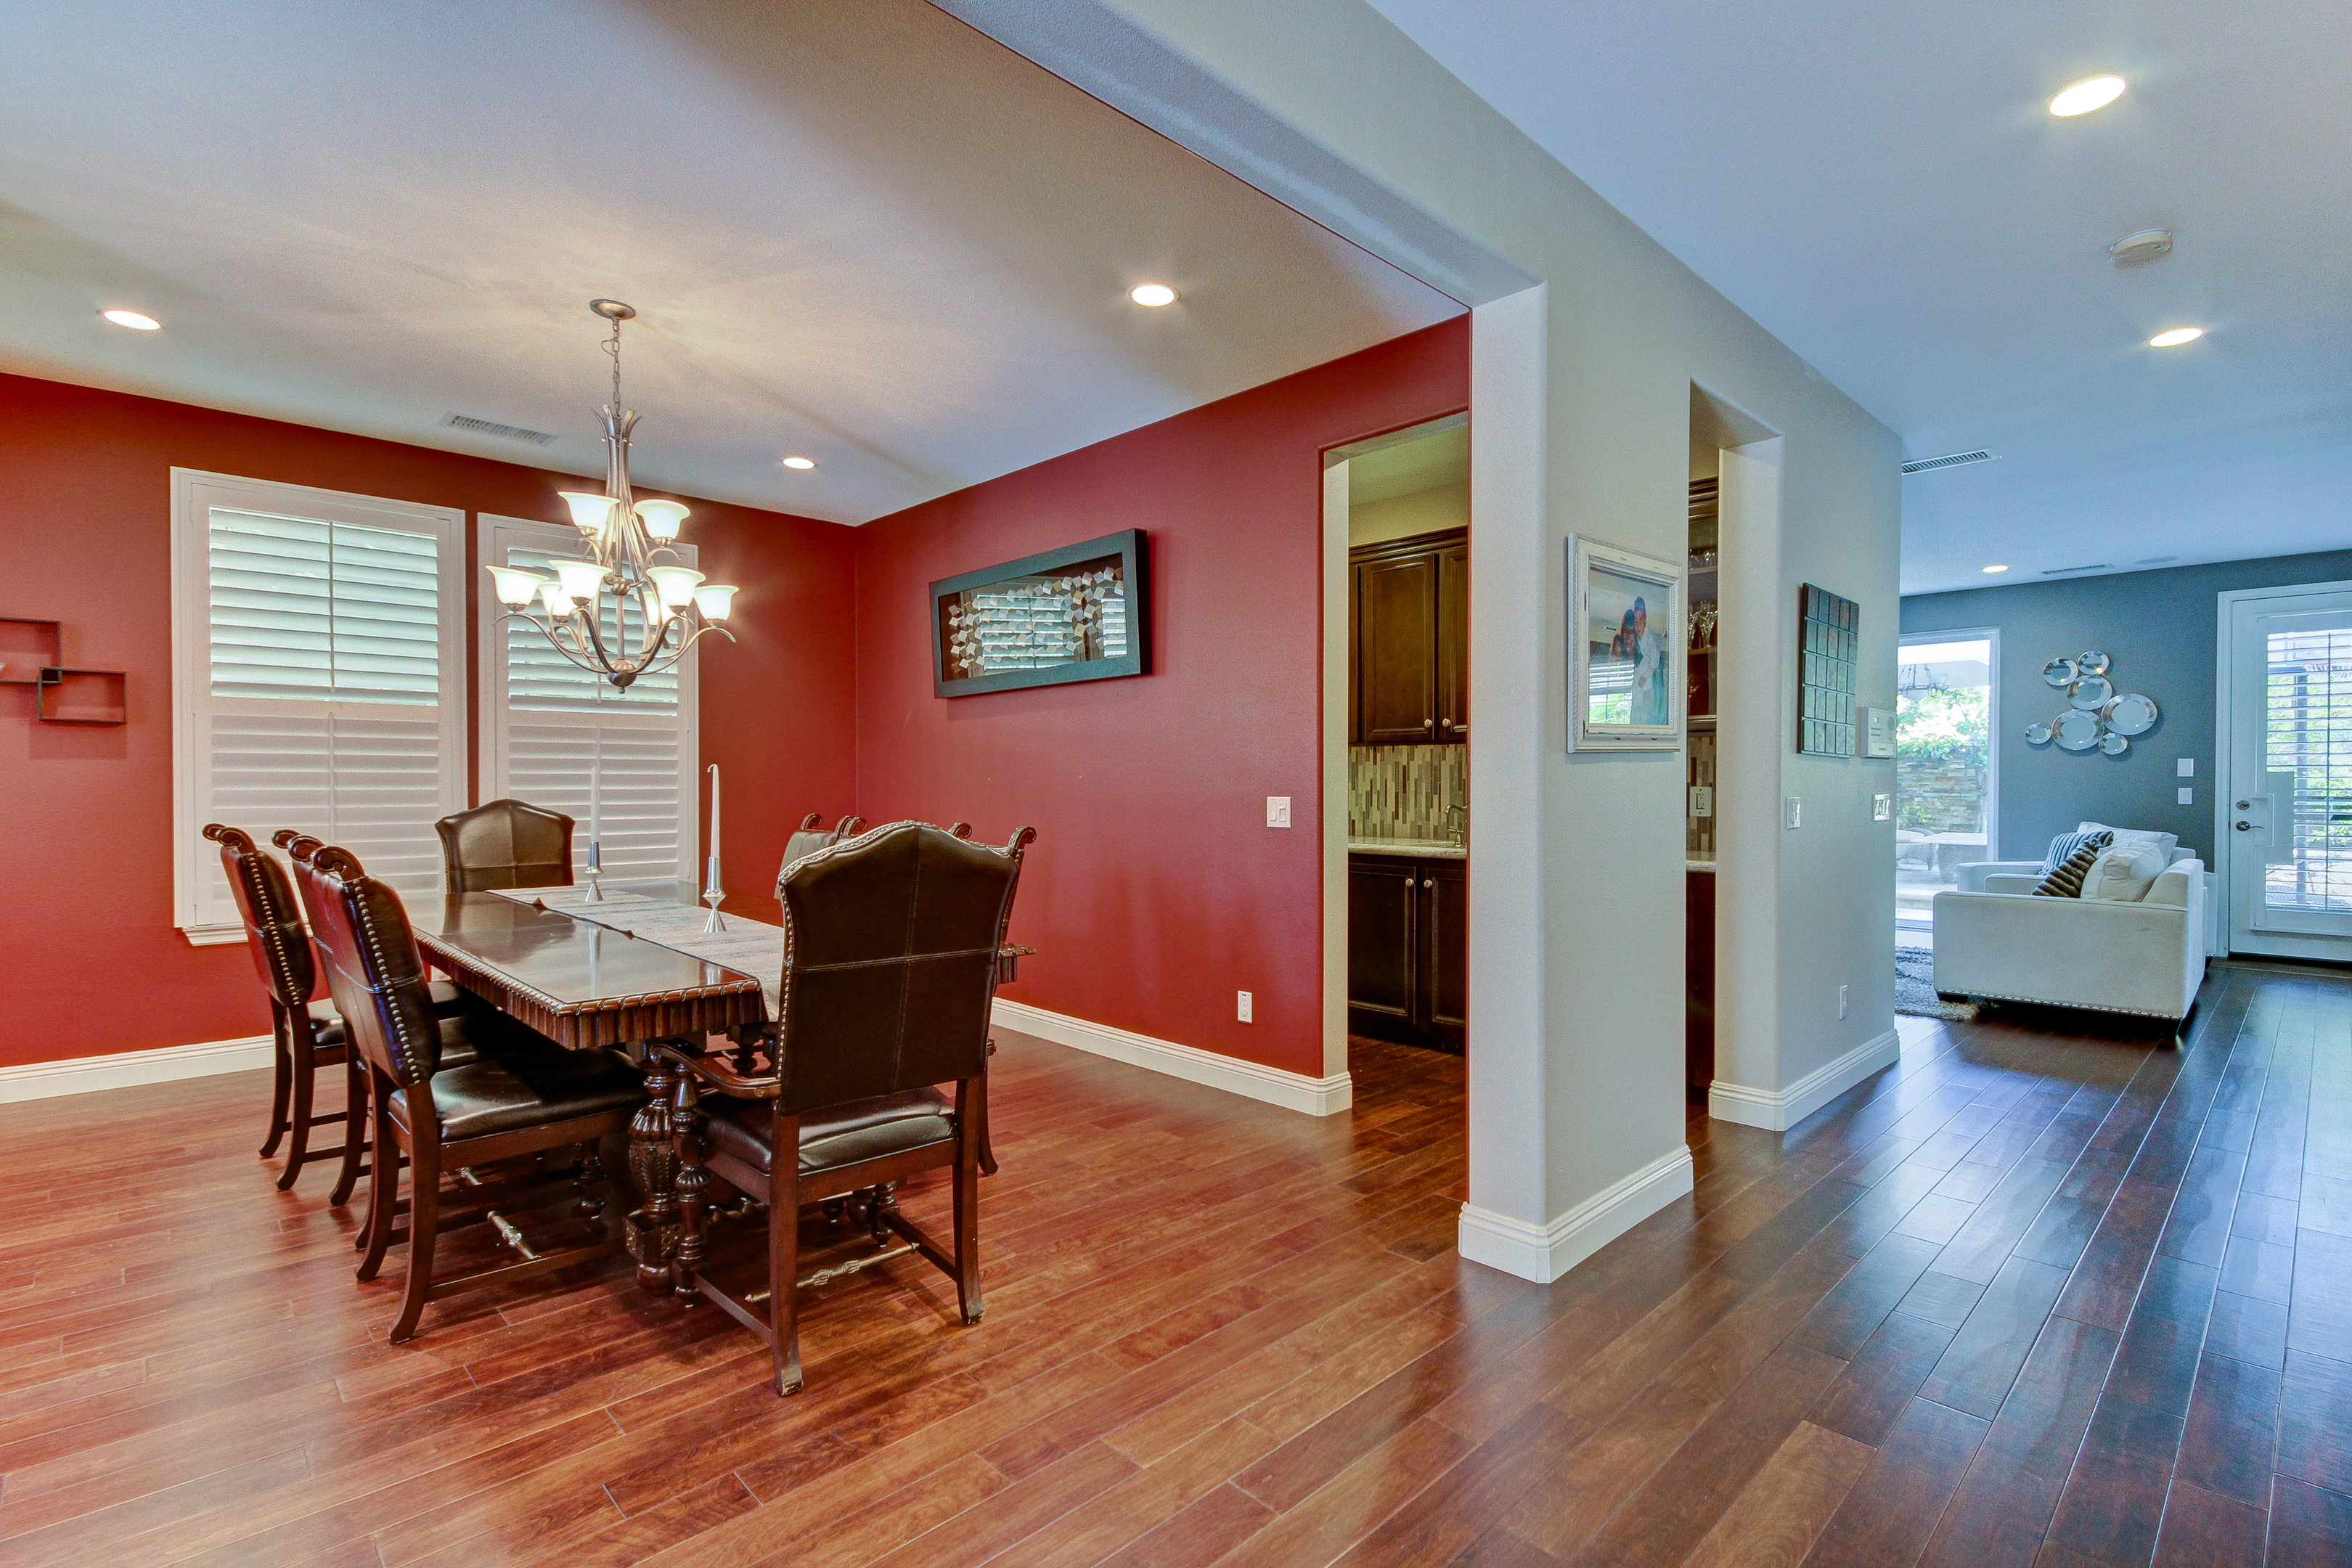 How a wide angle lens can make rooms appear larger to prospective buyers.